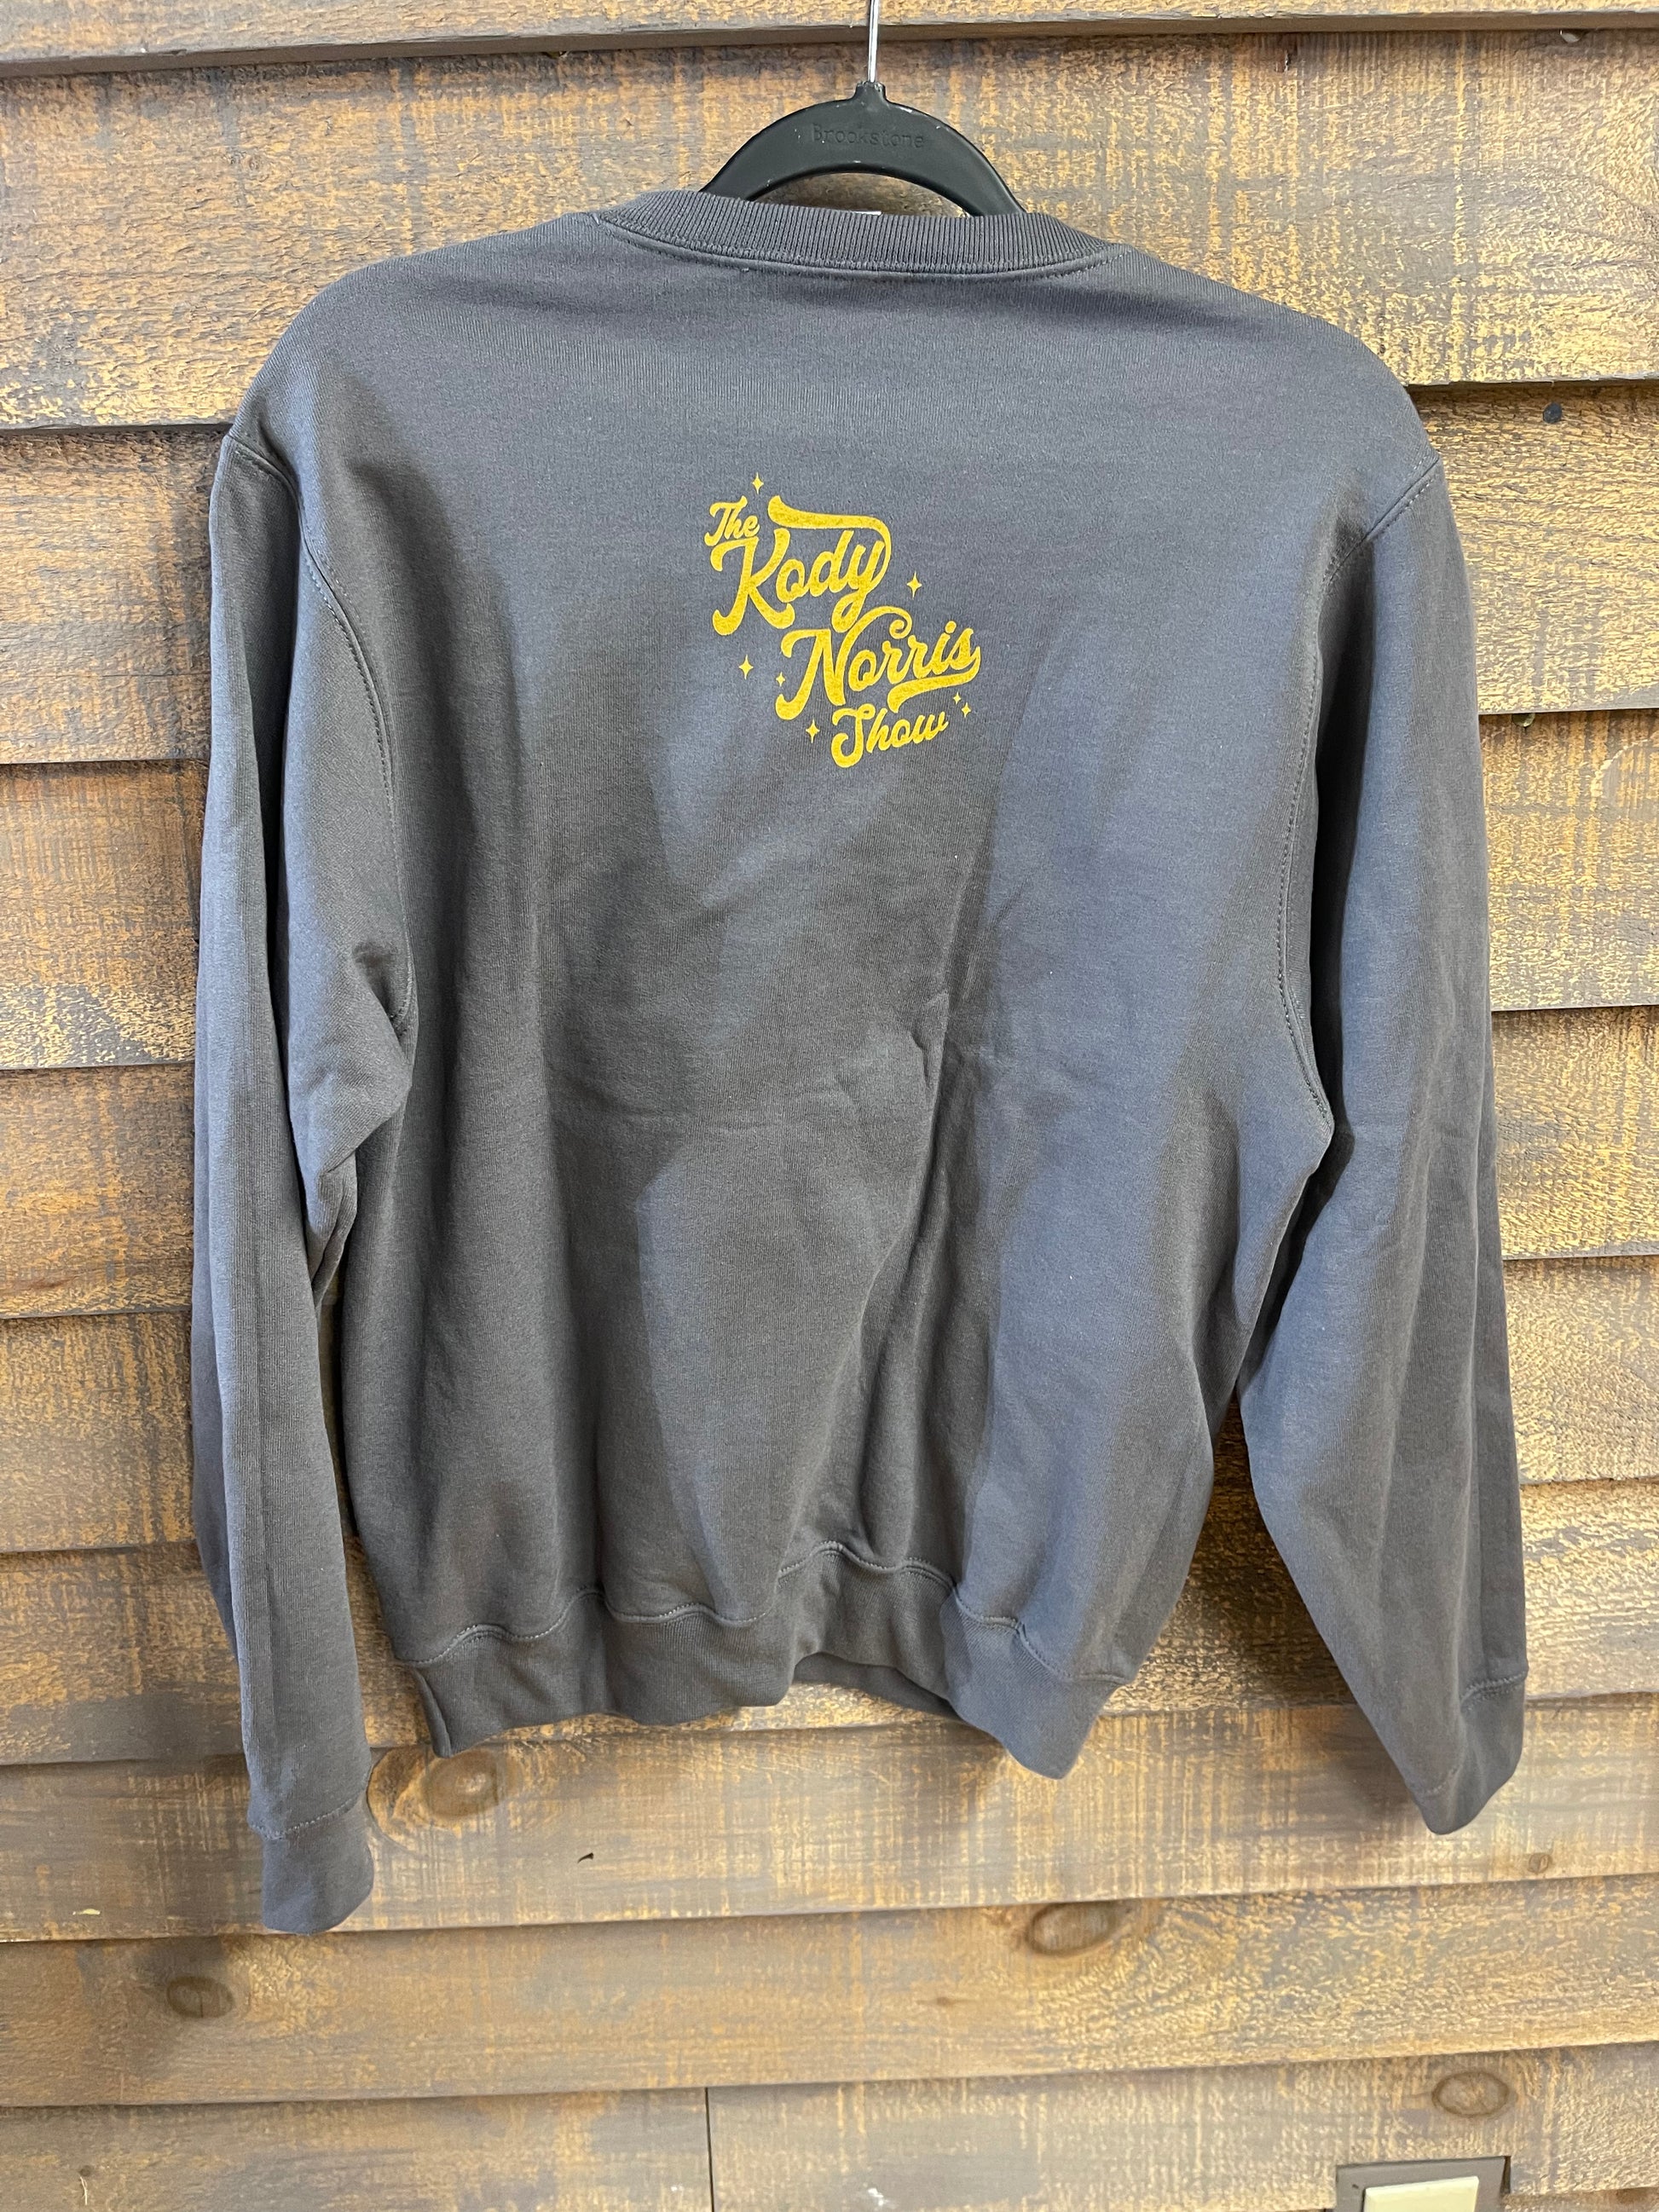 The Kody Norris Show Graphic Sweatshirt Available only in Charcoal with Gold Lettering. Port & Co. Brand. Super Soft! Includes small logo on back collar.